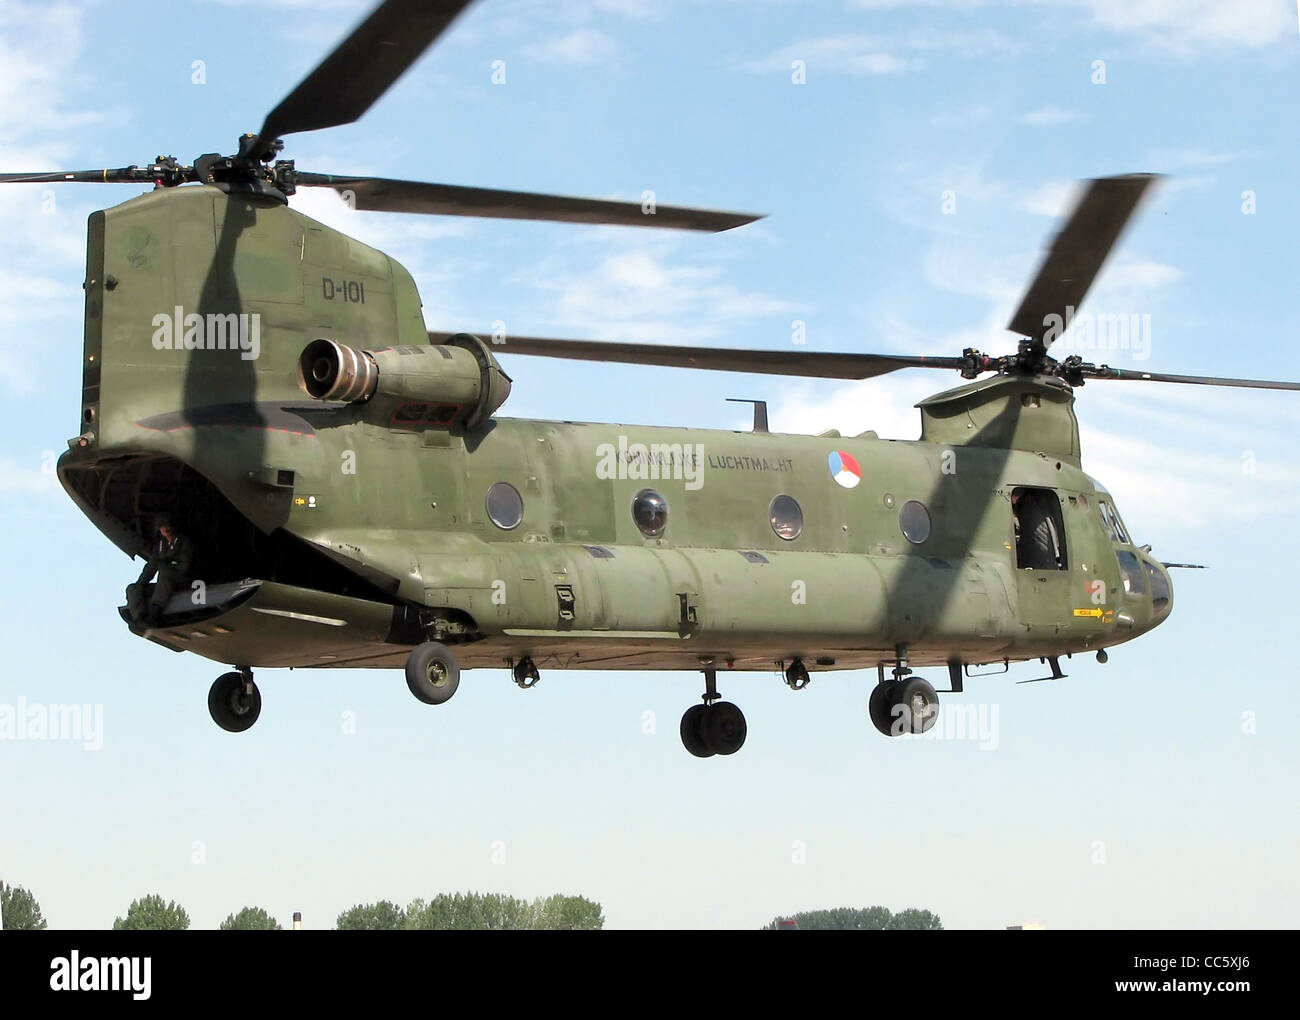 Chinook CH-47D of the Royal Netherlands Air Force (identifier D-101) taxis for takeoff at the Royal International Air Tattoo, Fa Stock Photo